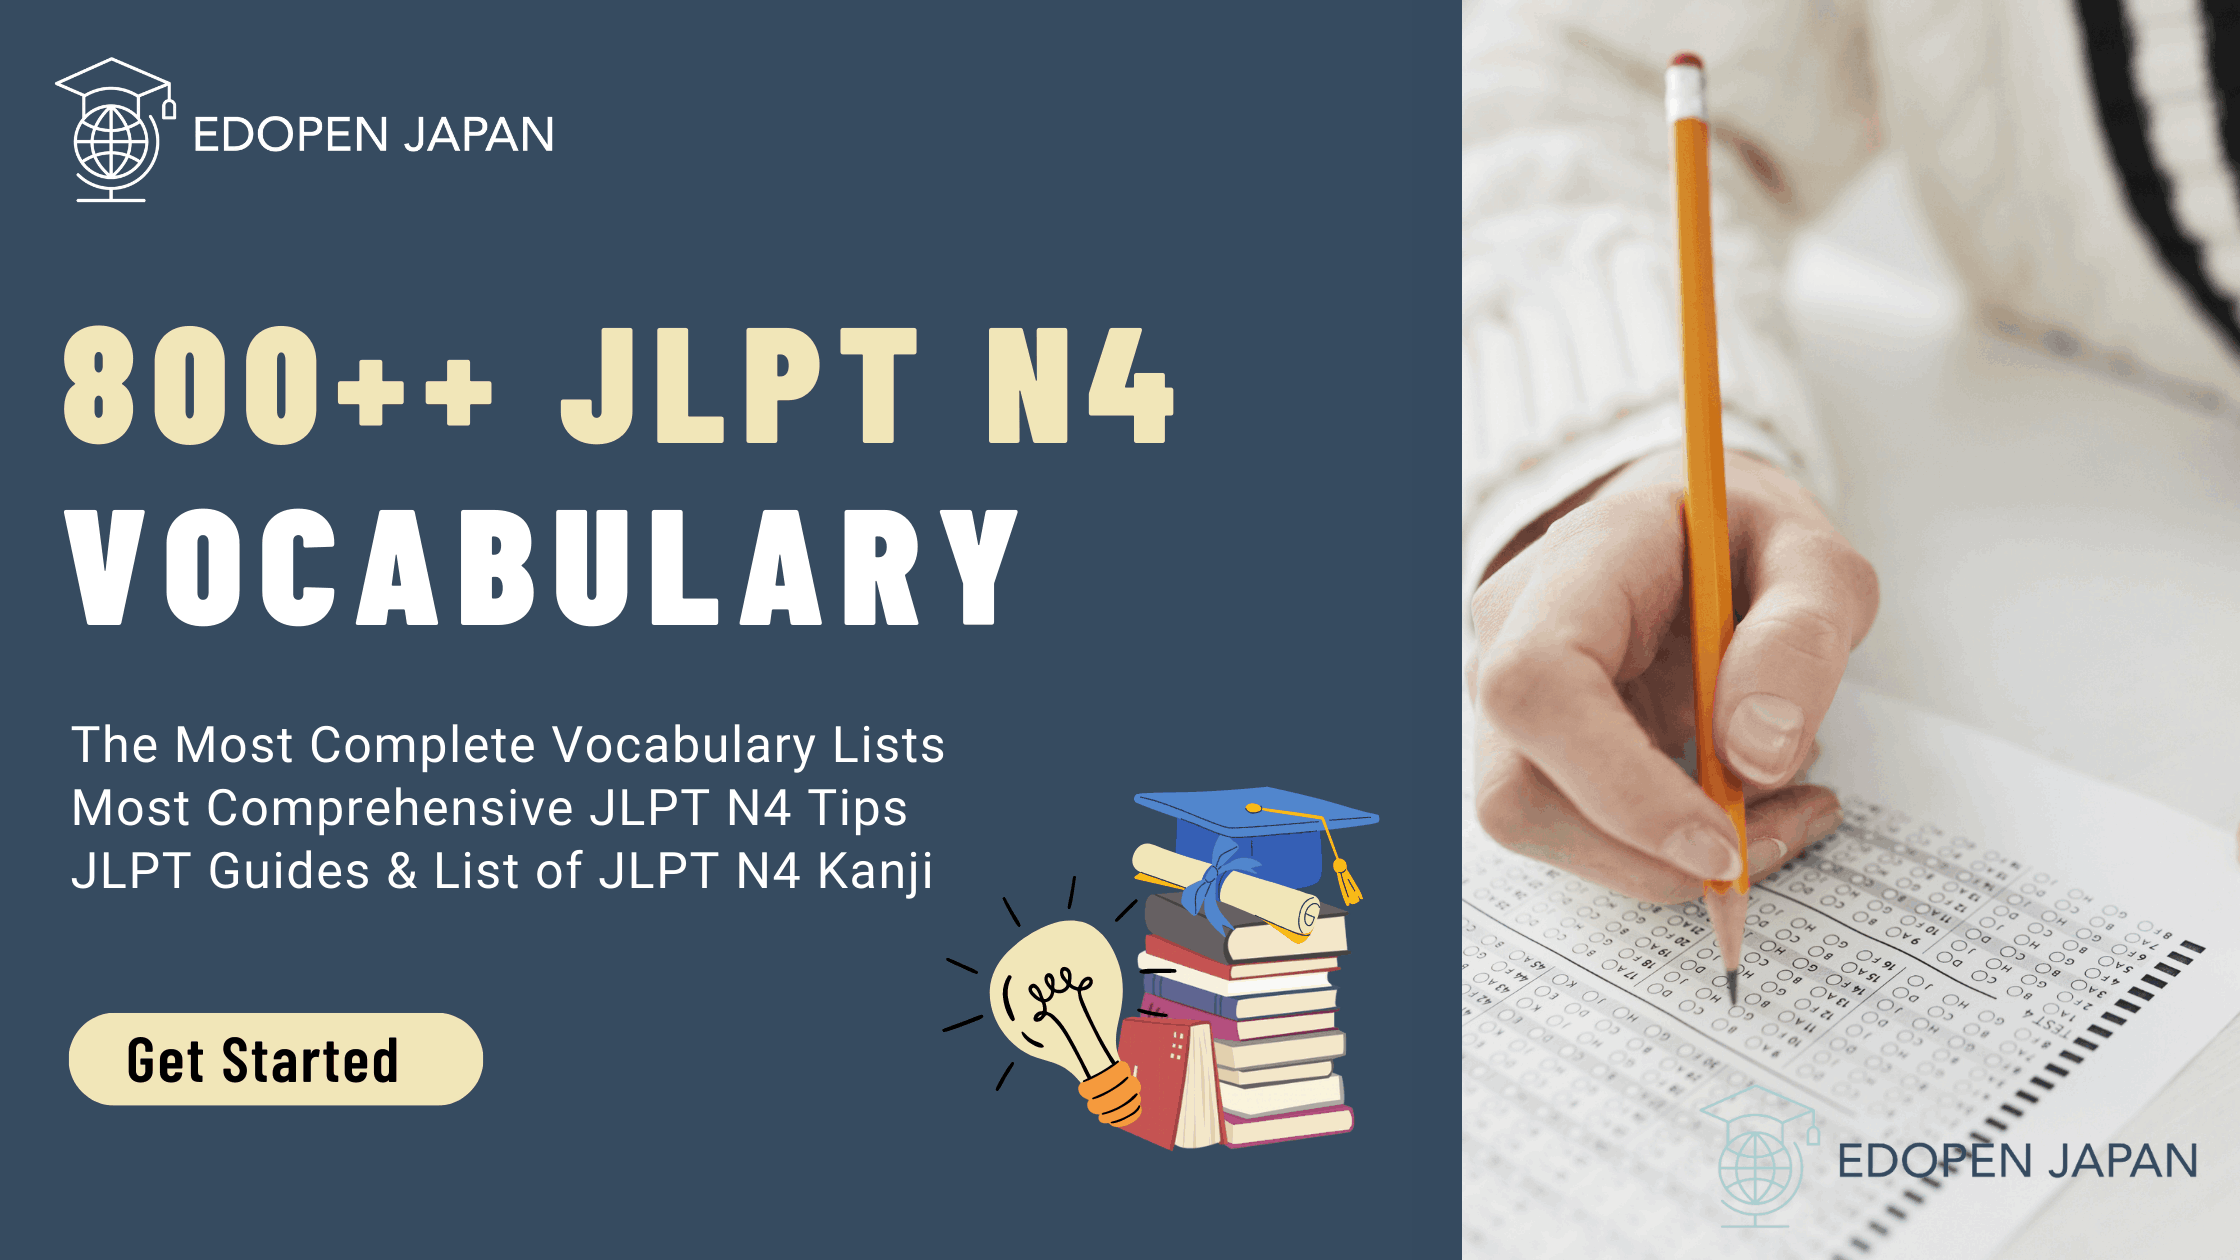 The Most Complete List of JLPT N4 Vocabulary - EDOPEN JAPAN